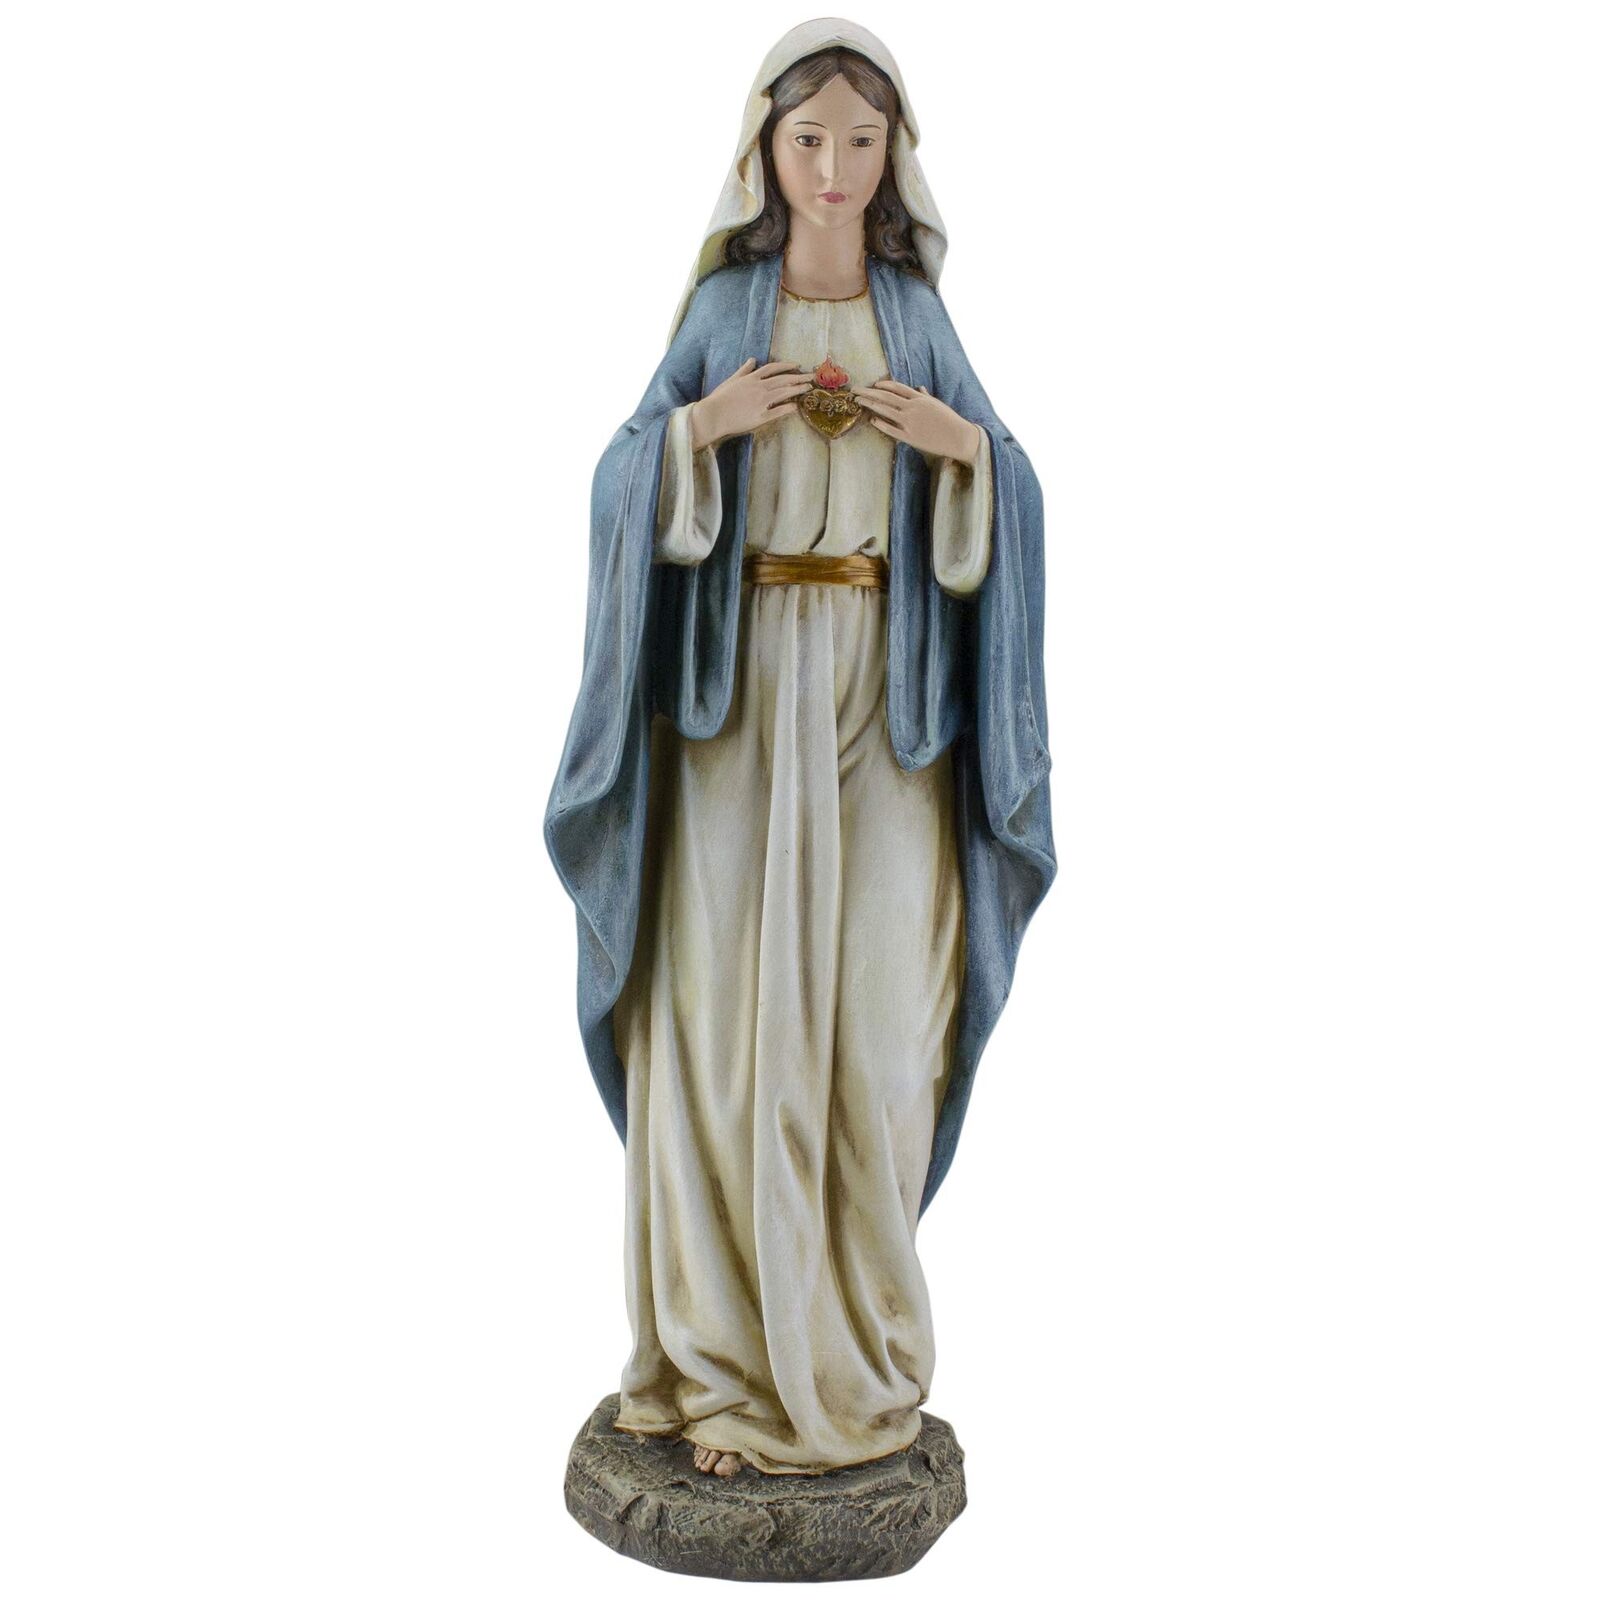 Joseph's Studio by Roman Exclusive Immaculate Heart of Mary Figurine, 14-Inch